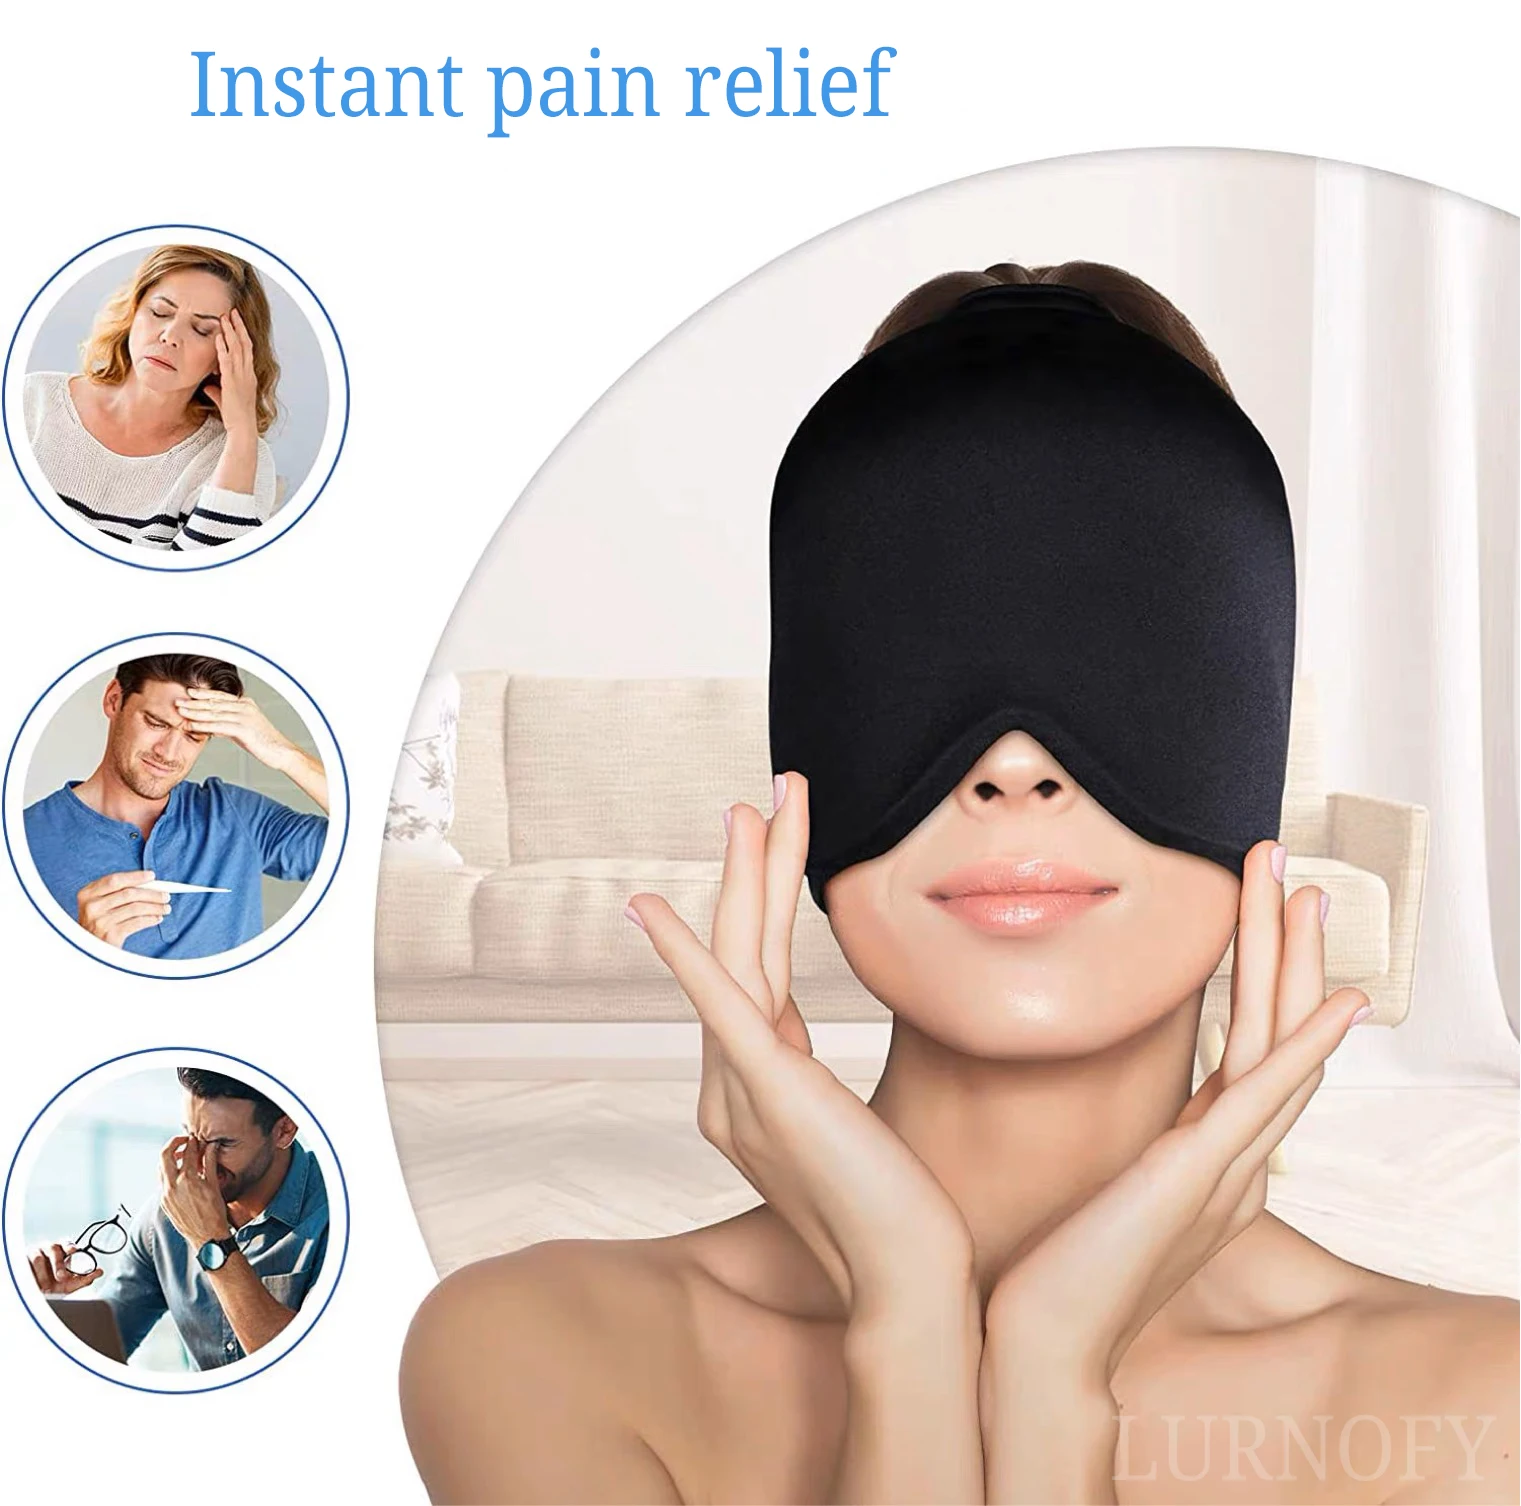 

Gel Ice Headache Hat Hot Cold Therapy Migraine Relief Cap Head Wrap Ice Pack Mask for Puffy Eyes Tension Sinus Stress